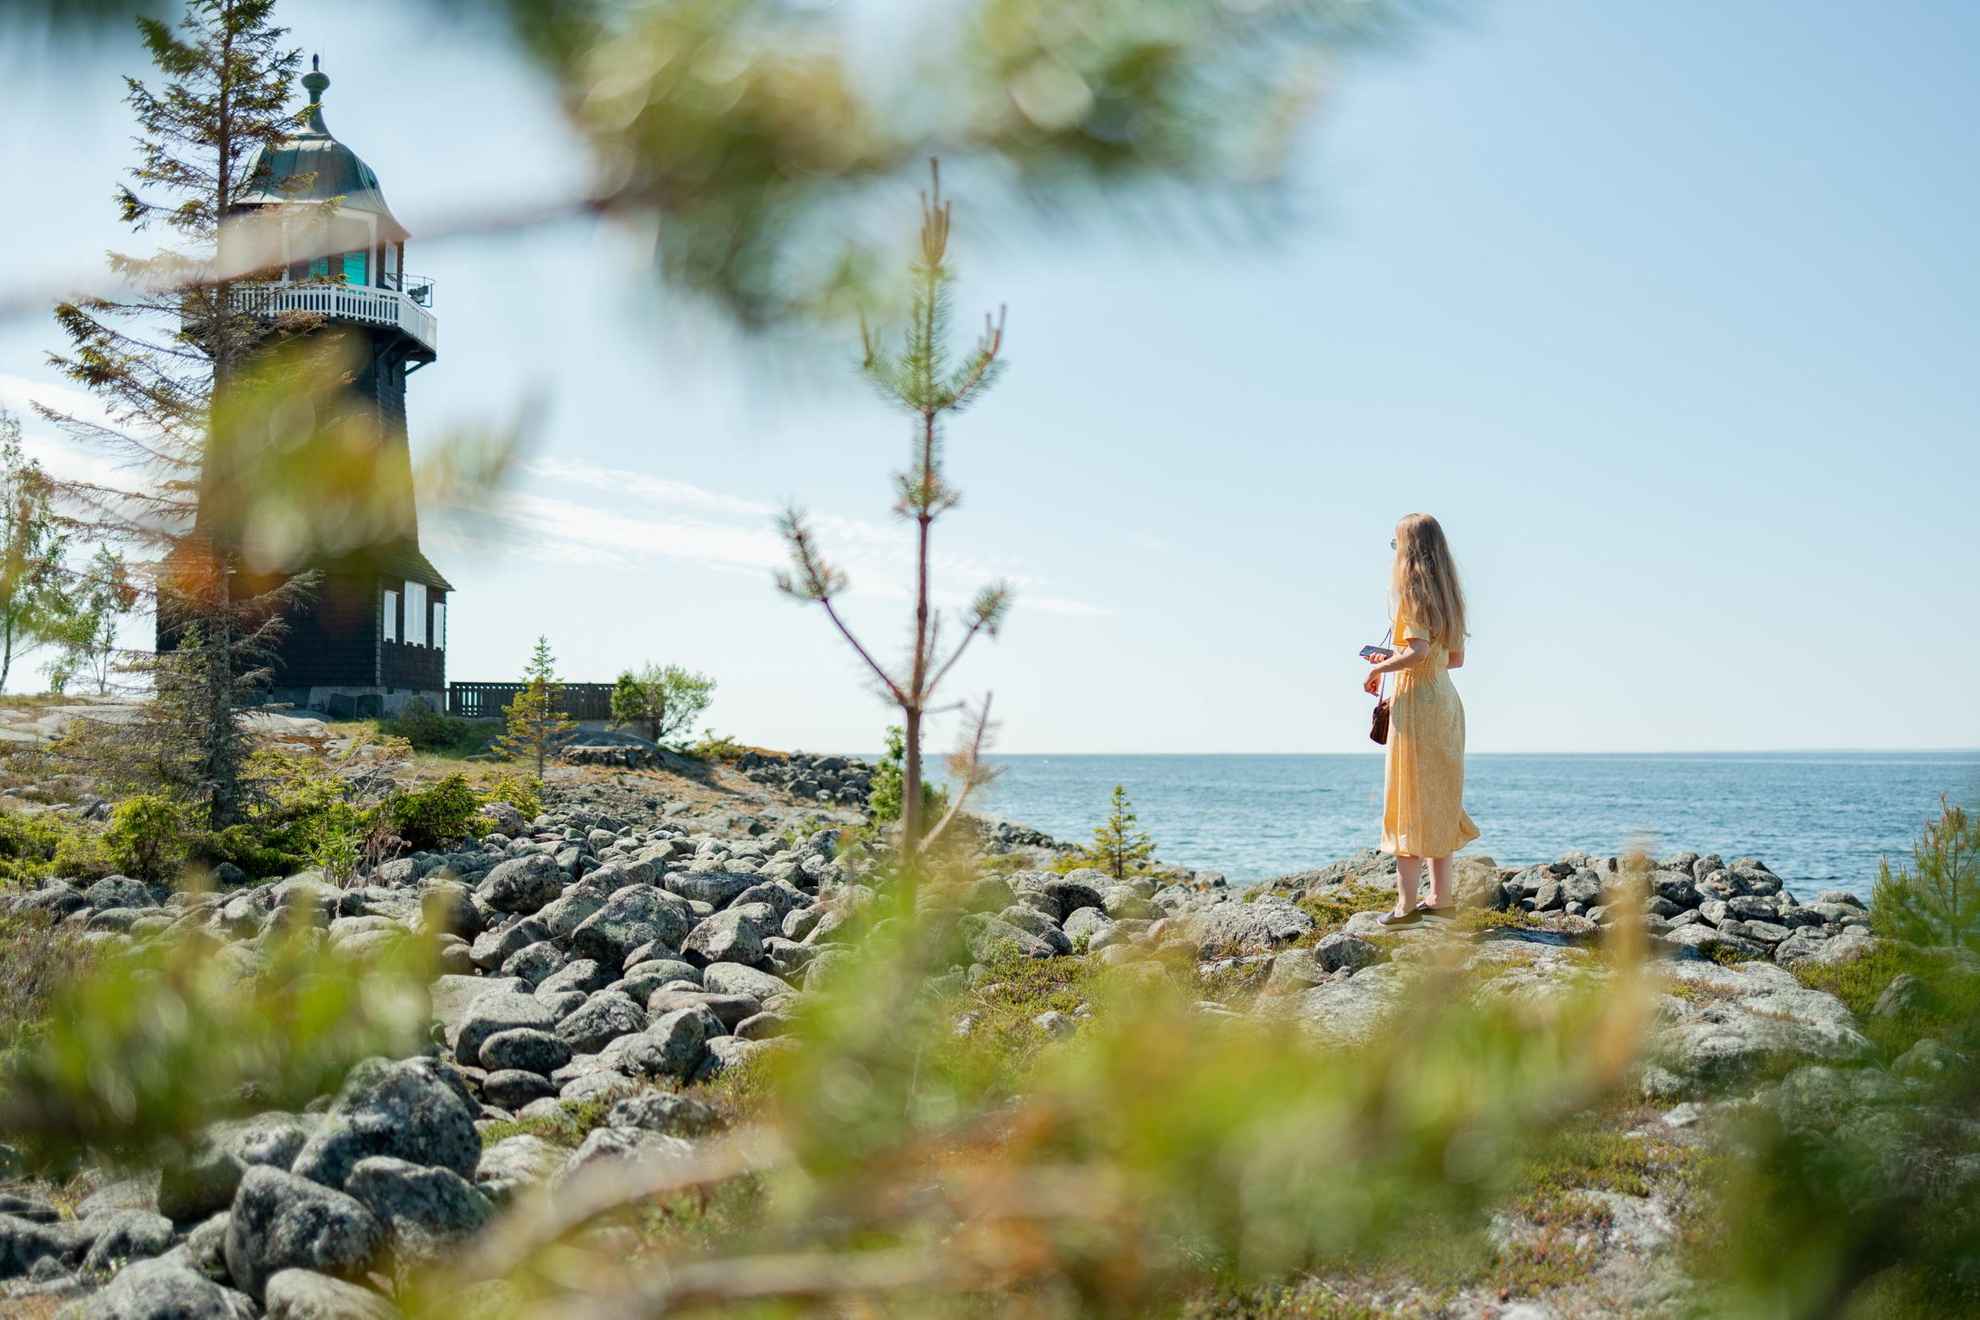 A woman is standing on a shore looking towards a lighthouse.